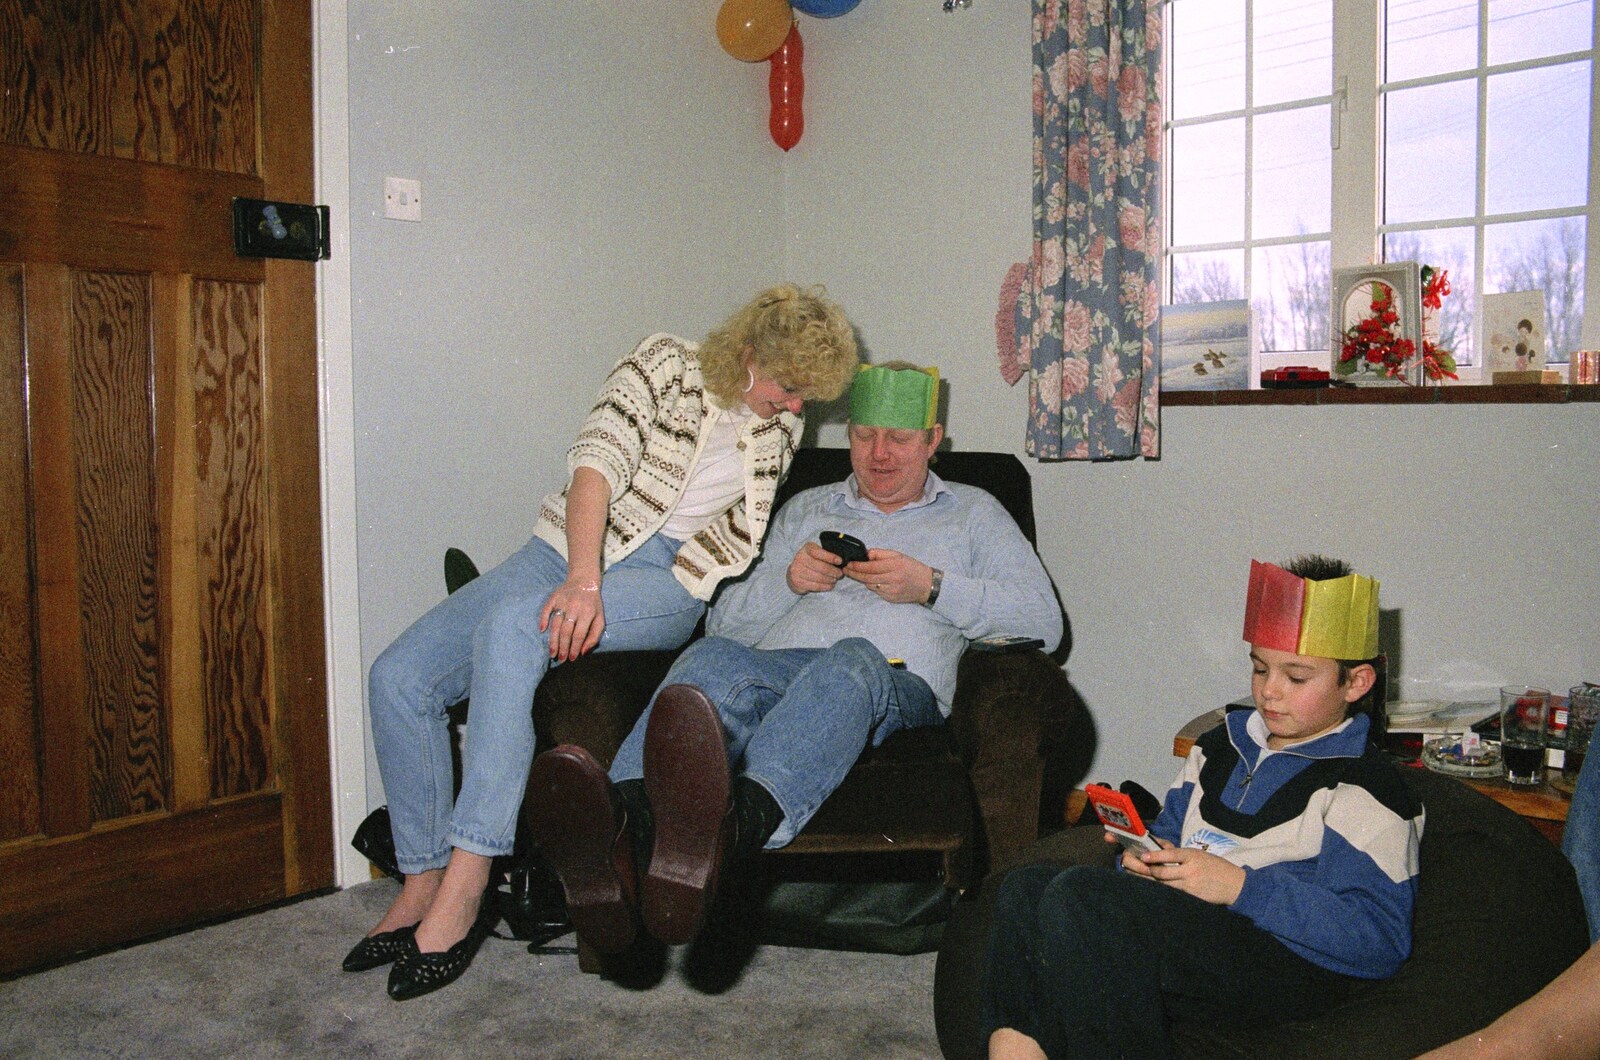 Kate leans over from Late Night, and Christmas with the Coxes, Needham, Norfolk - 25th December 1989